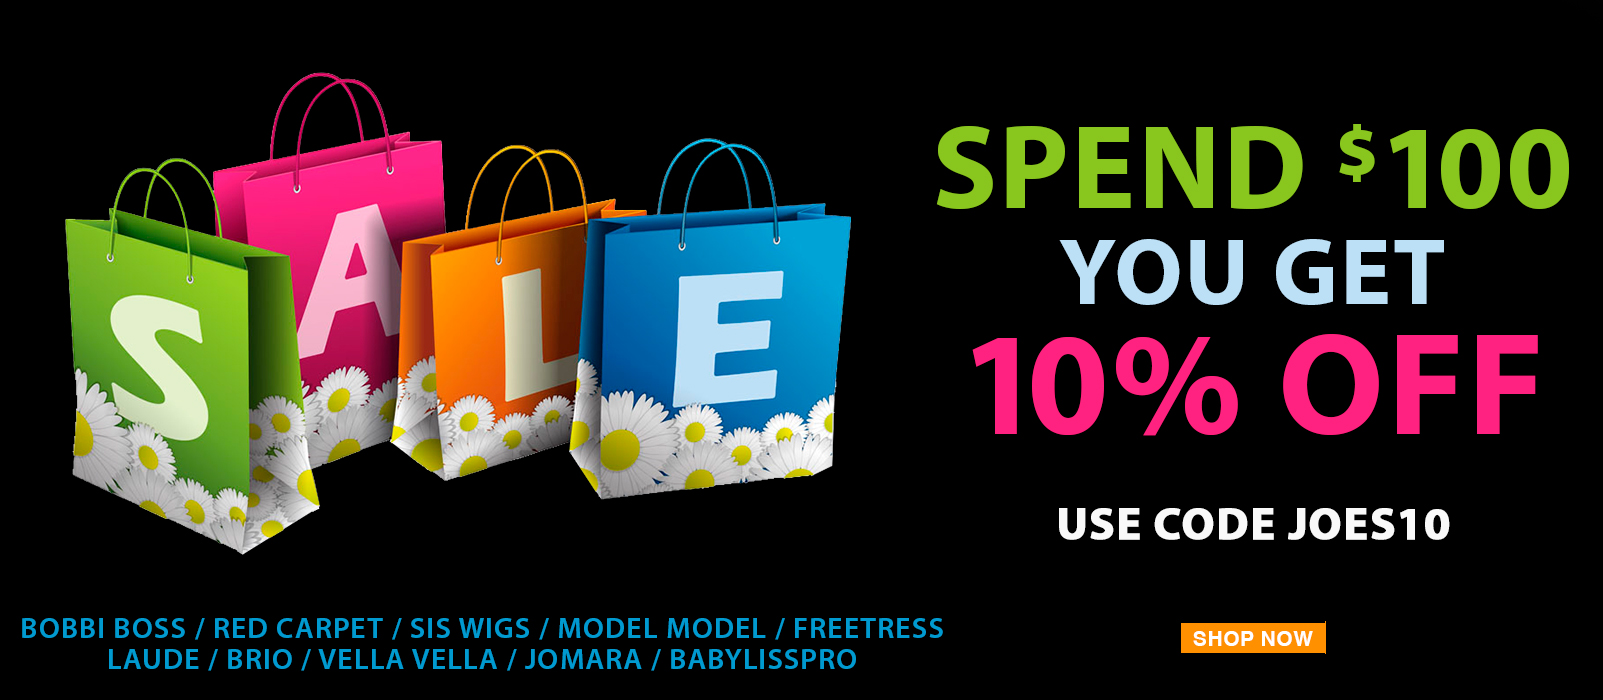 SAVE 10% WHEN YOU BUY $100 OR MORE AT JOES BEAUTY